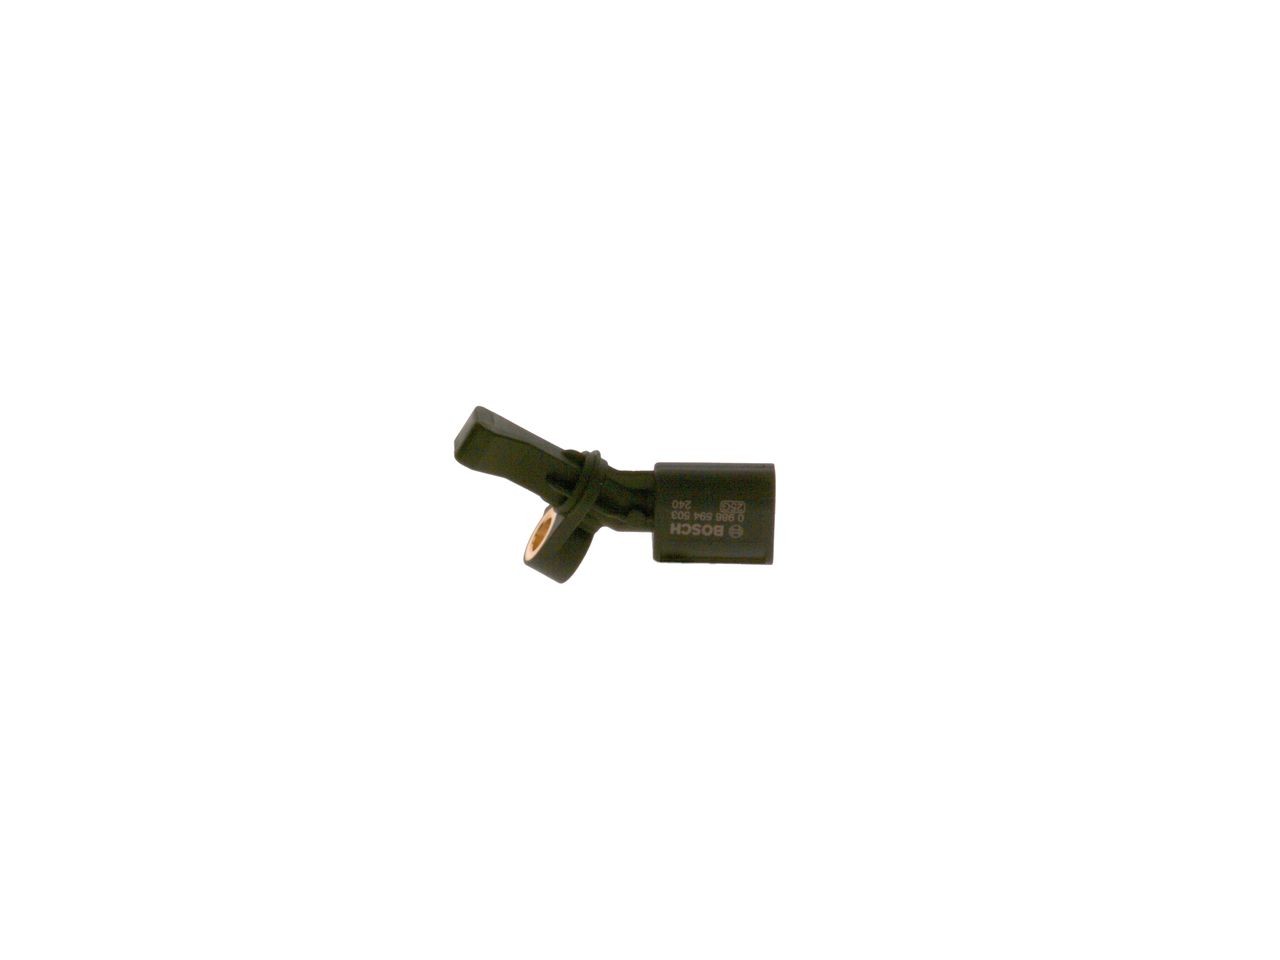 0986594503 Sensor, wheel speed WS503 BOSCH without cable, Active sensor, 61mm